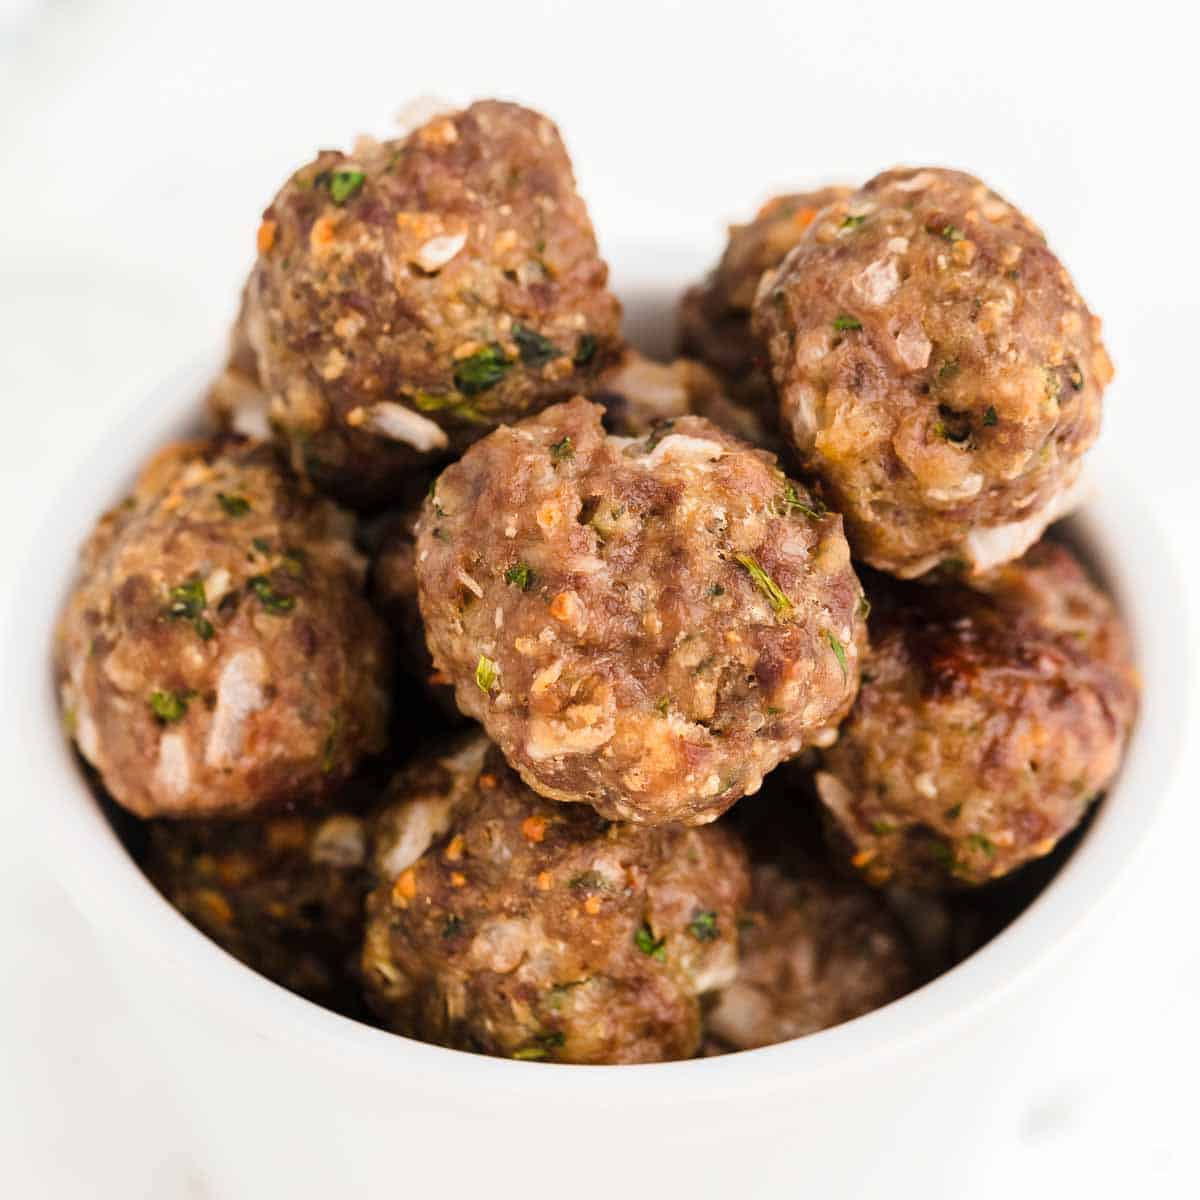 Baked Meatballs in a white bowl